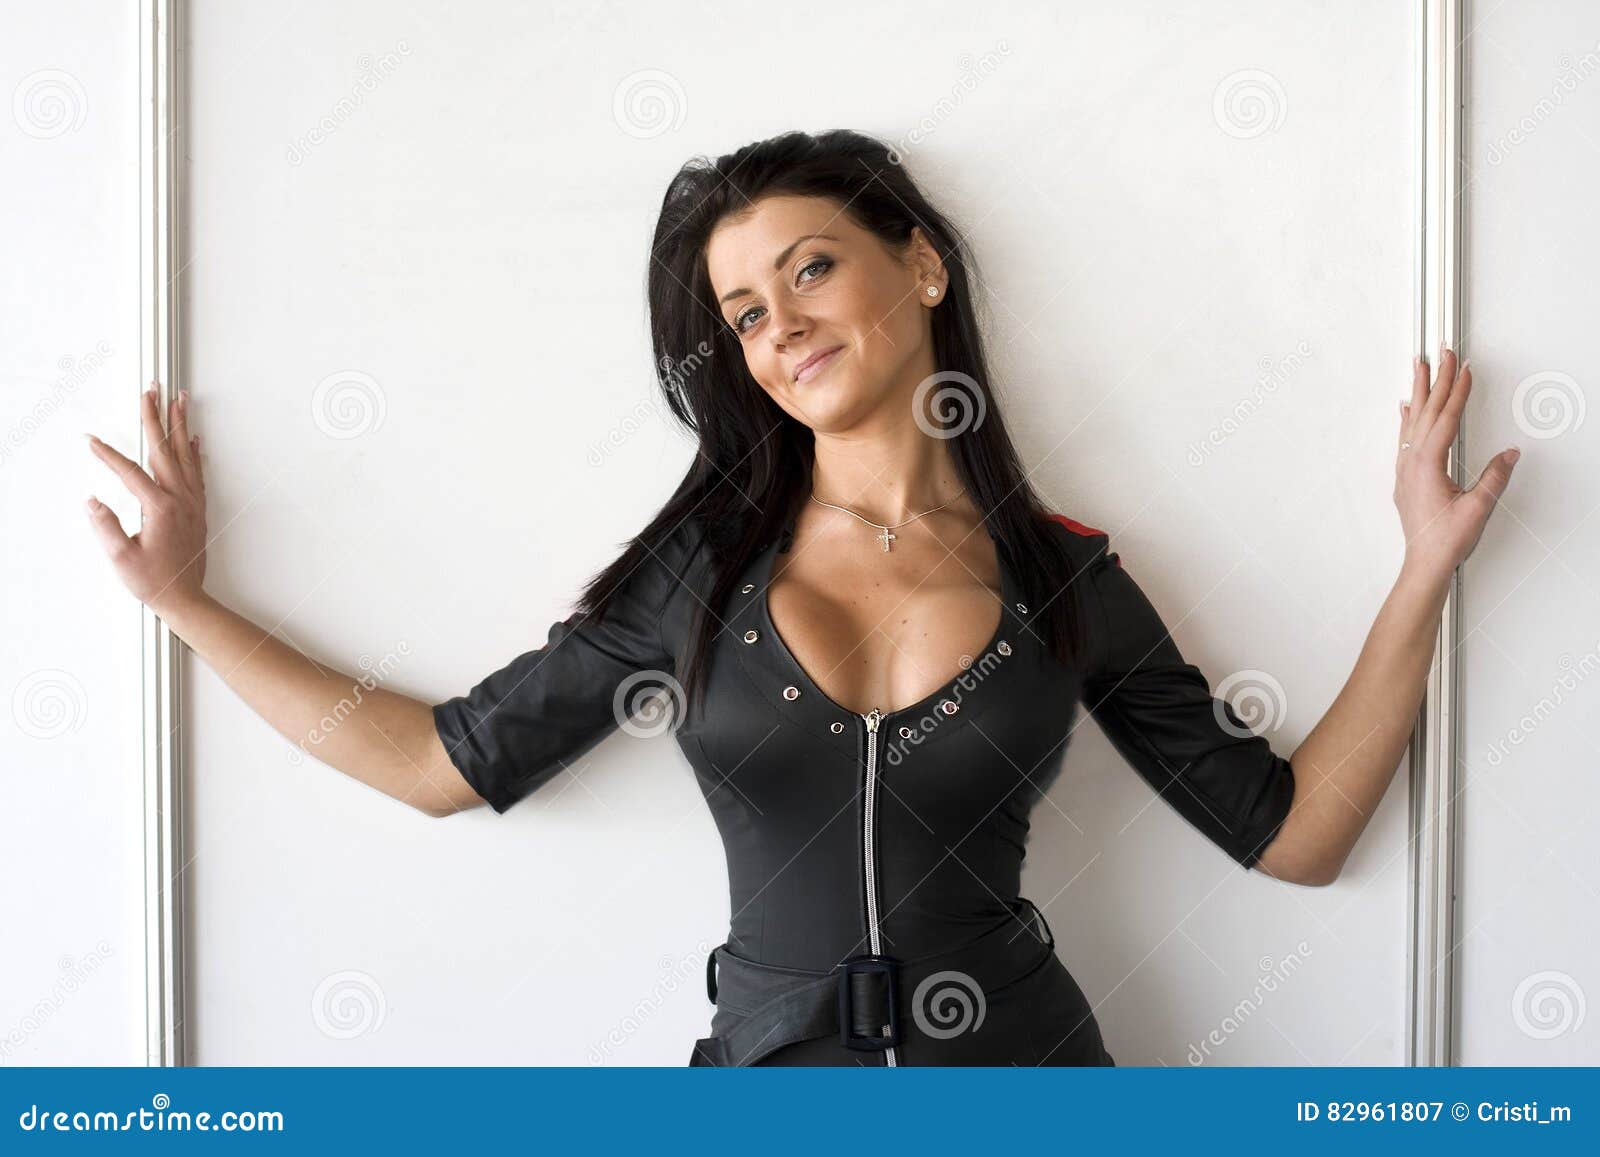 Young Attractive Woman with Big Round Boobs Wearing a Racing Costume Stock  Image - Image of girl, boobs: 82961807